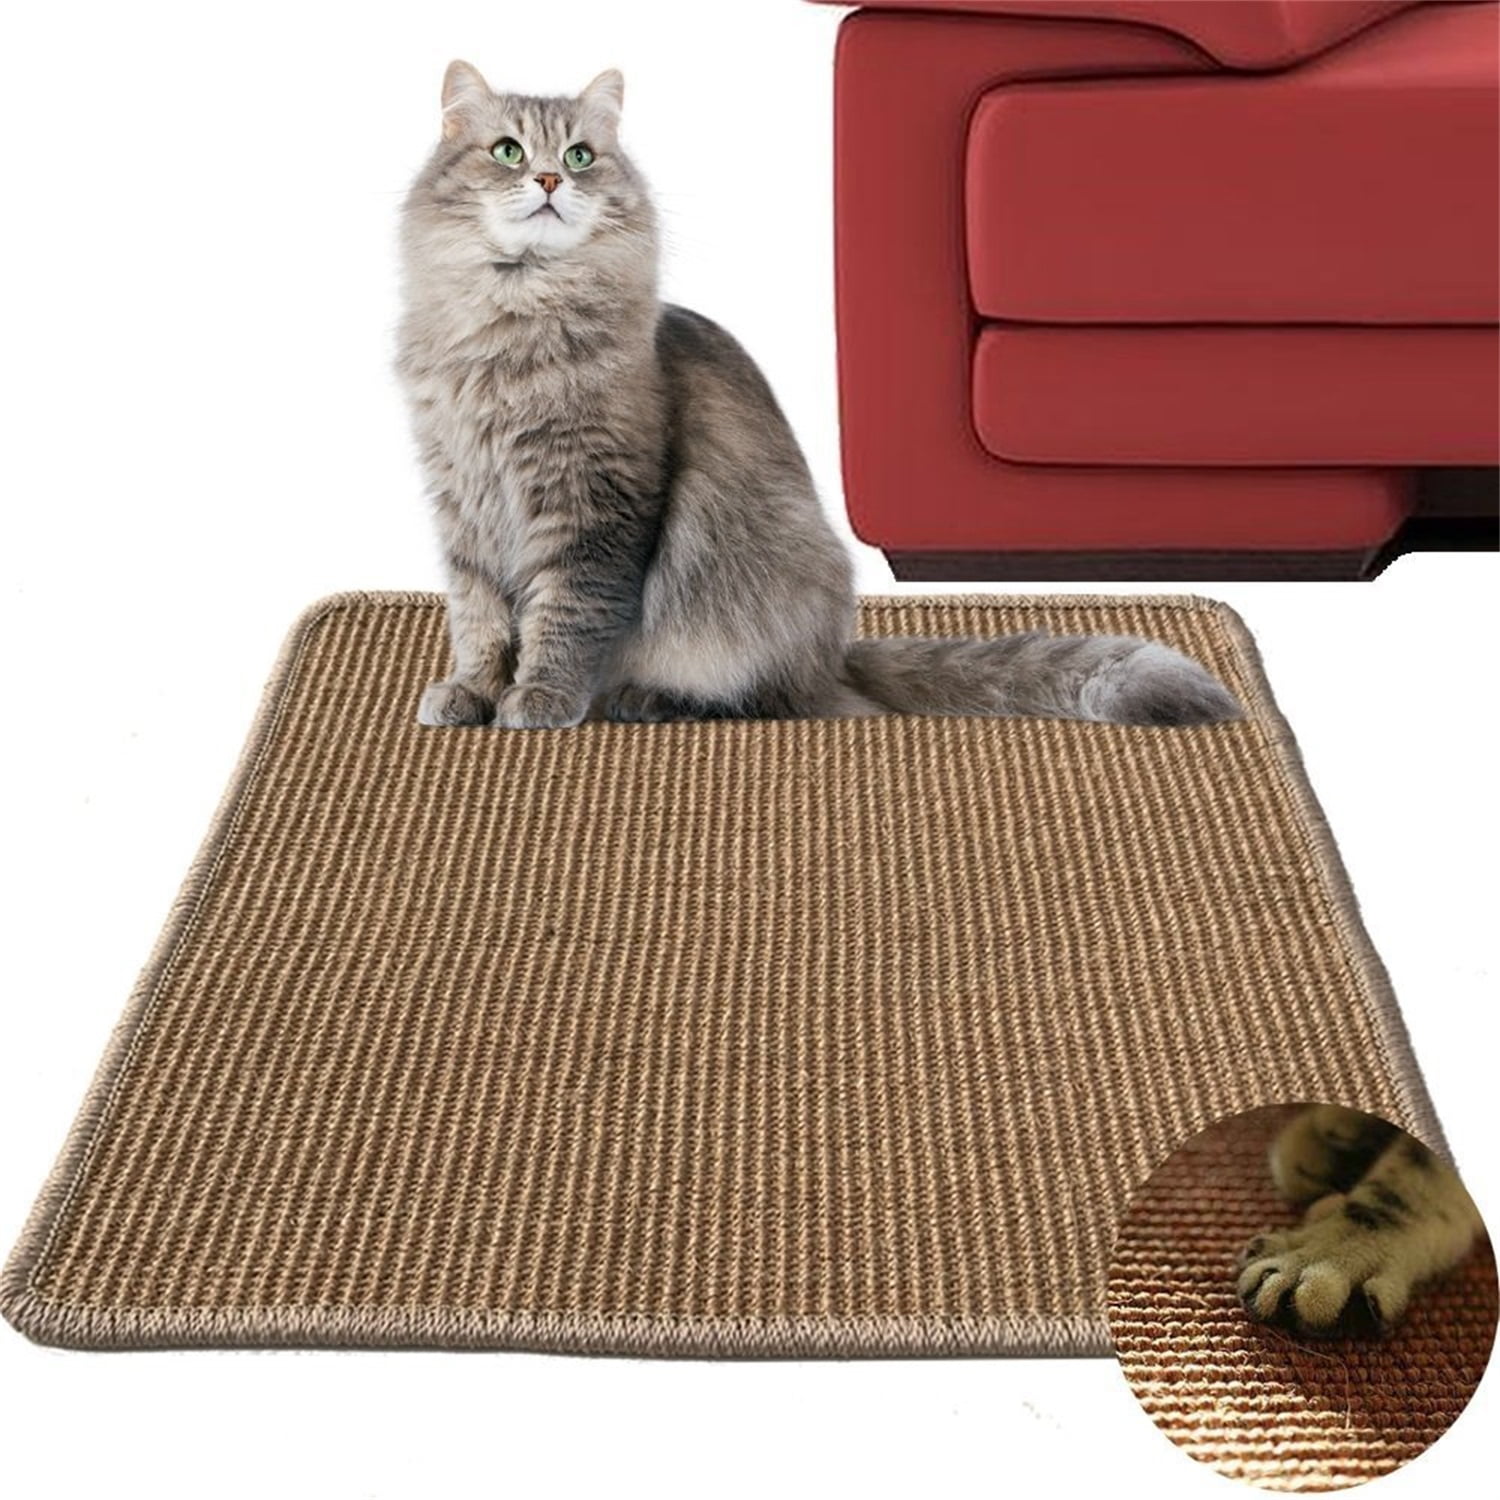 Khaki POHOVE Cat Scratch Board Kitten Corner Pet Supplies Durable Sisal pe Wear Resistant Mat Funny Wall Hanging Toy Protective Post Non-toxic Pad